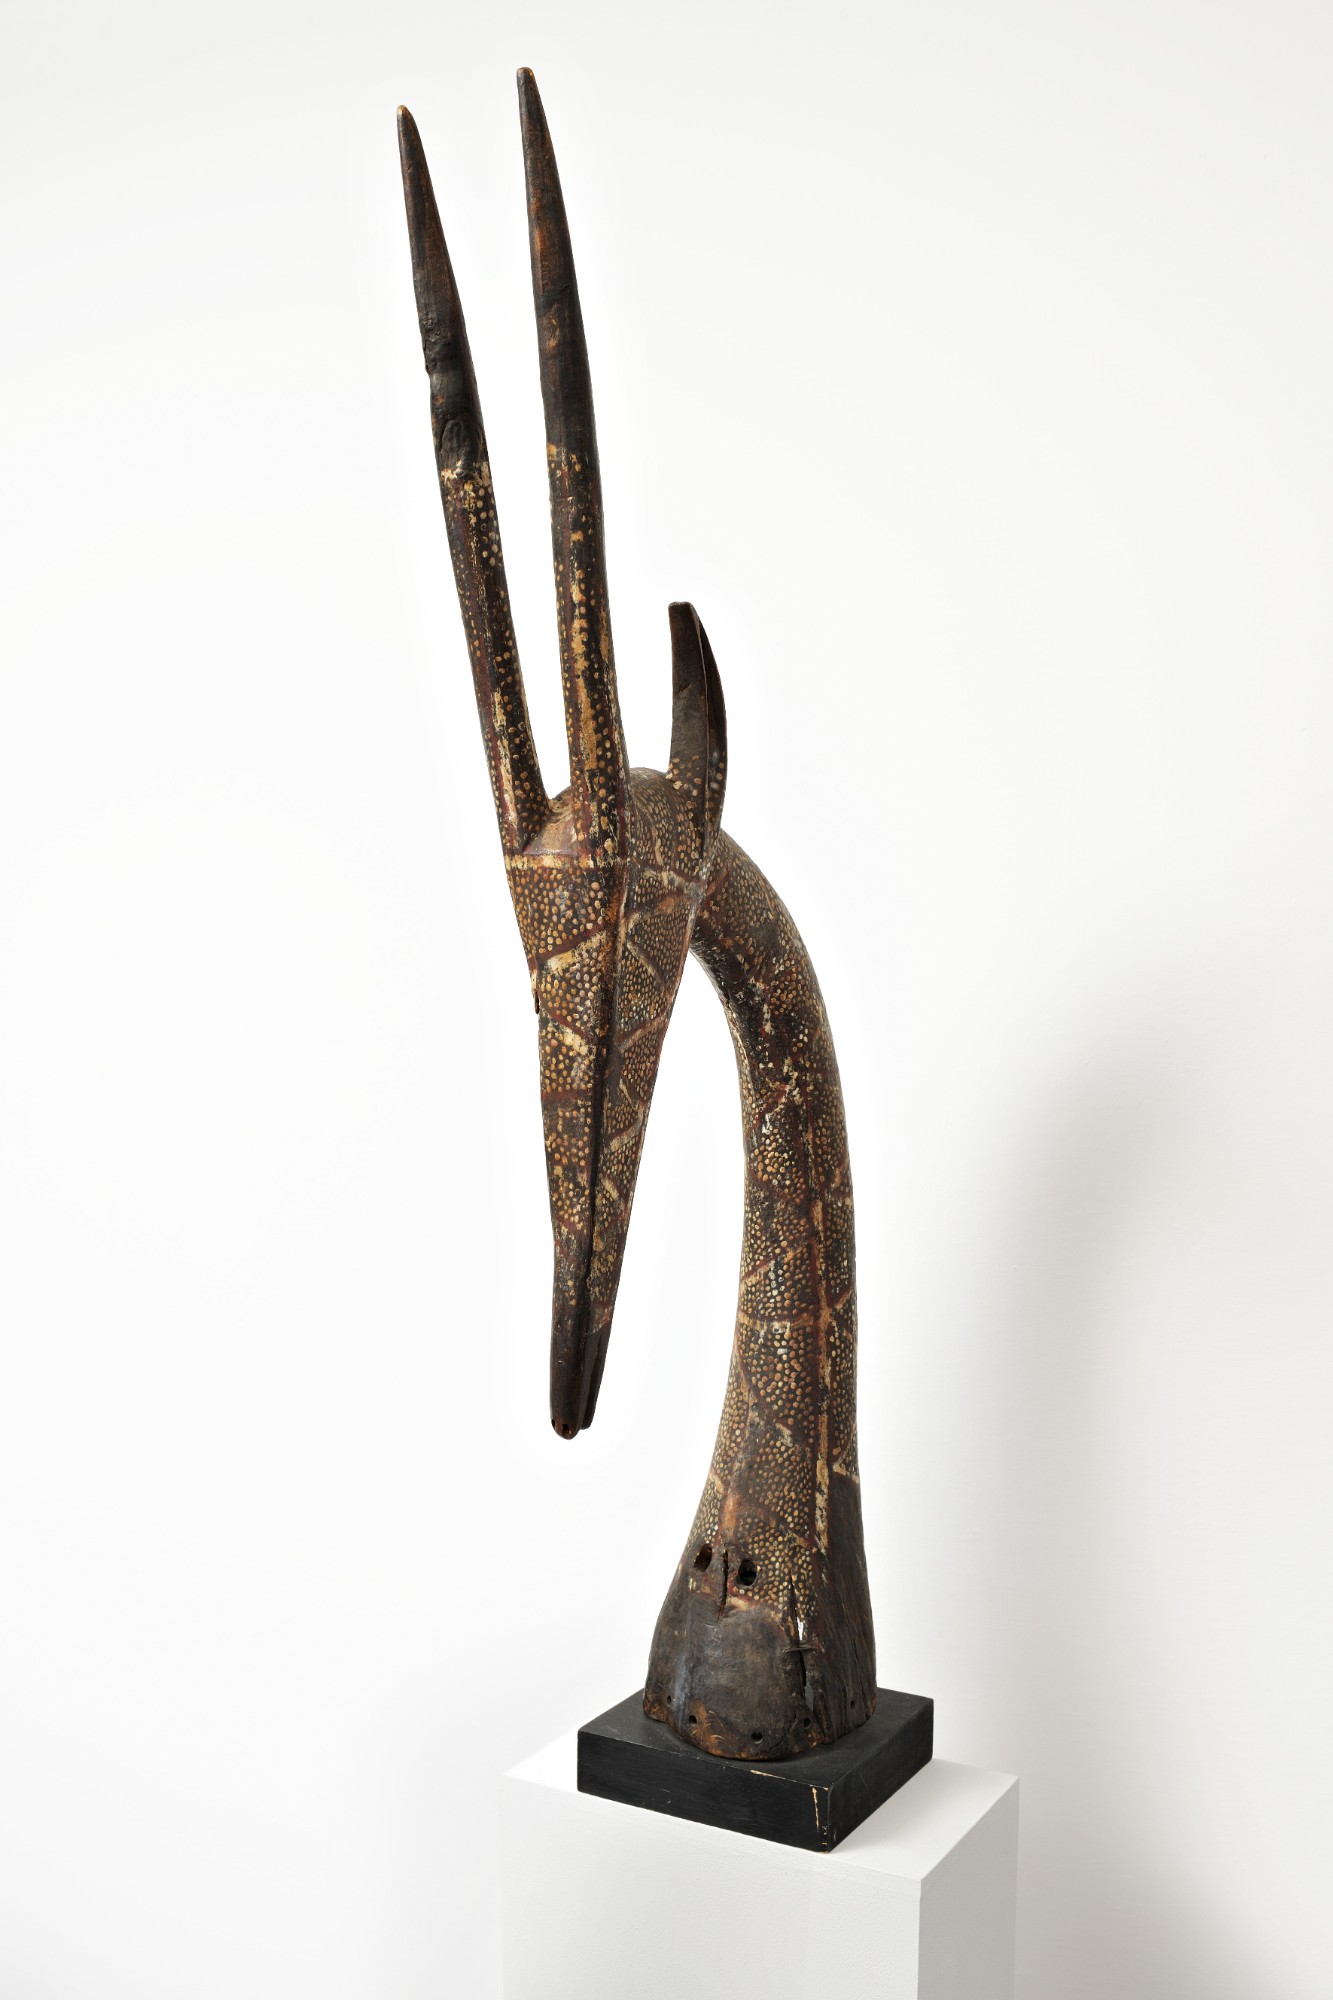 West African Uppervolta, Kurumba Antilope of the Mossi Tribe, about 1925, wood, 114 x 18 x 30 cm